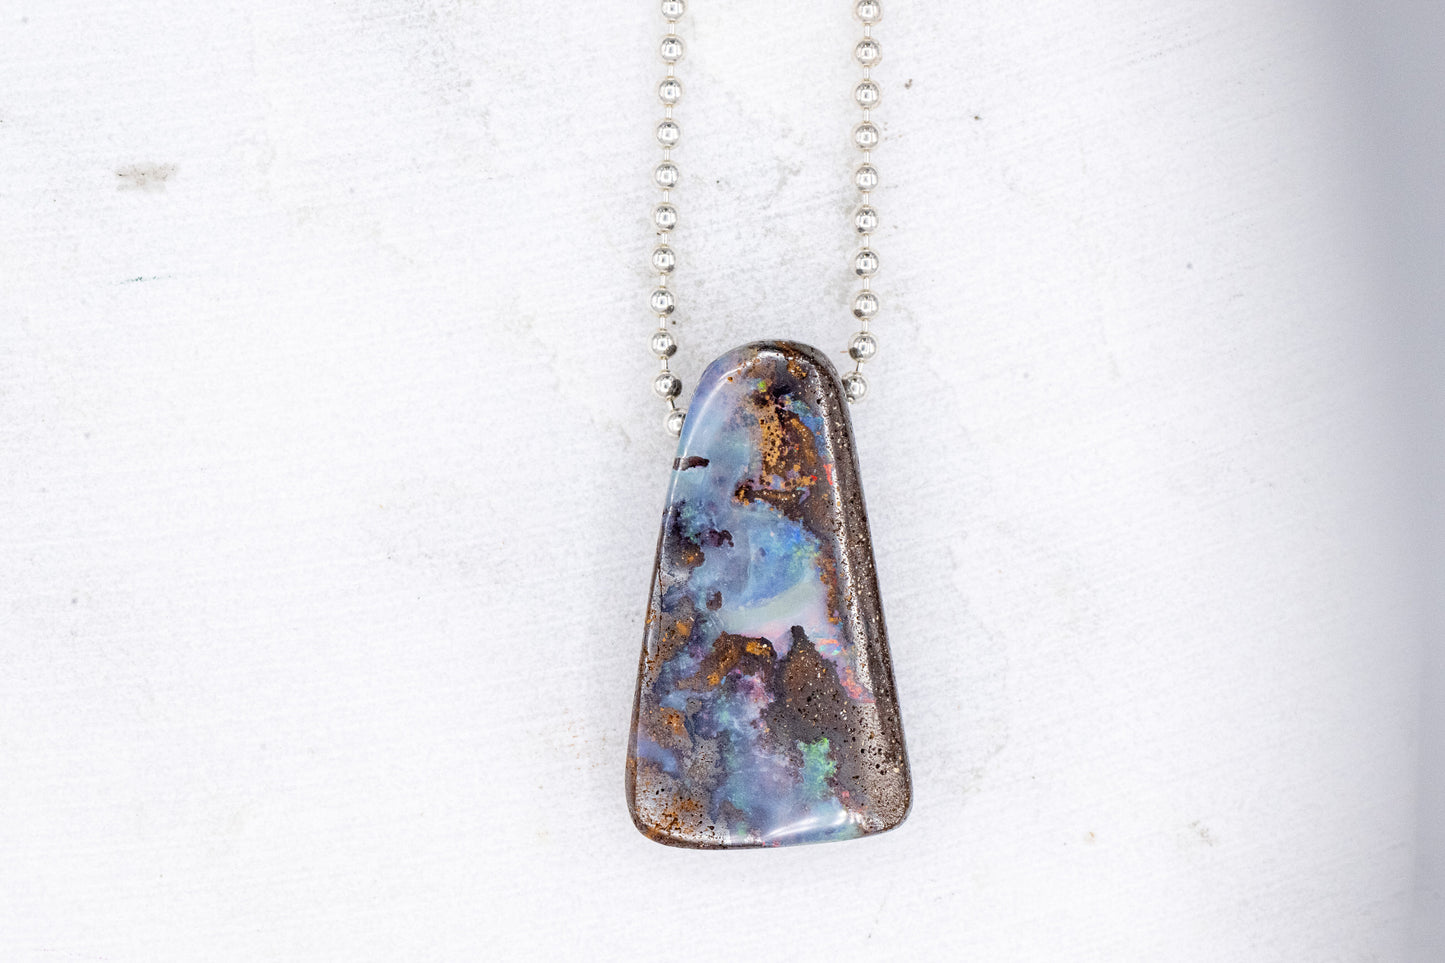 A One of a kind Australian Opal Necklace with an opal pendant on it, handmade by Cassin Jewelry.